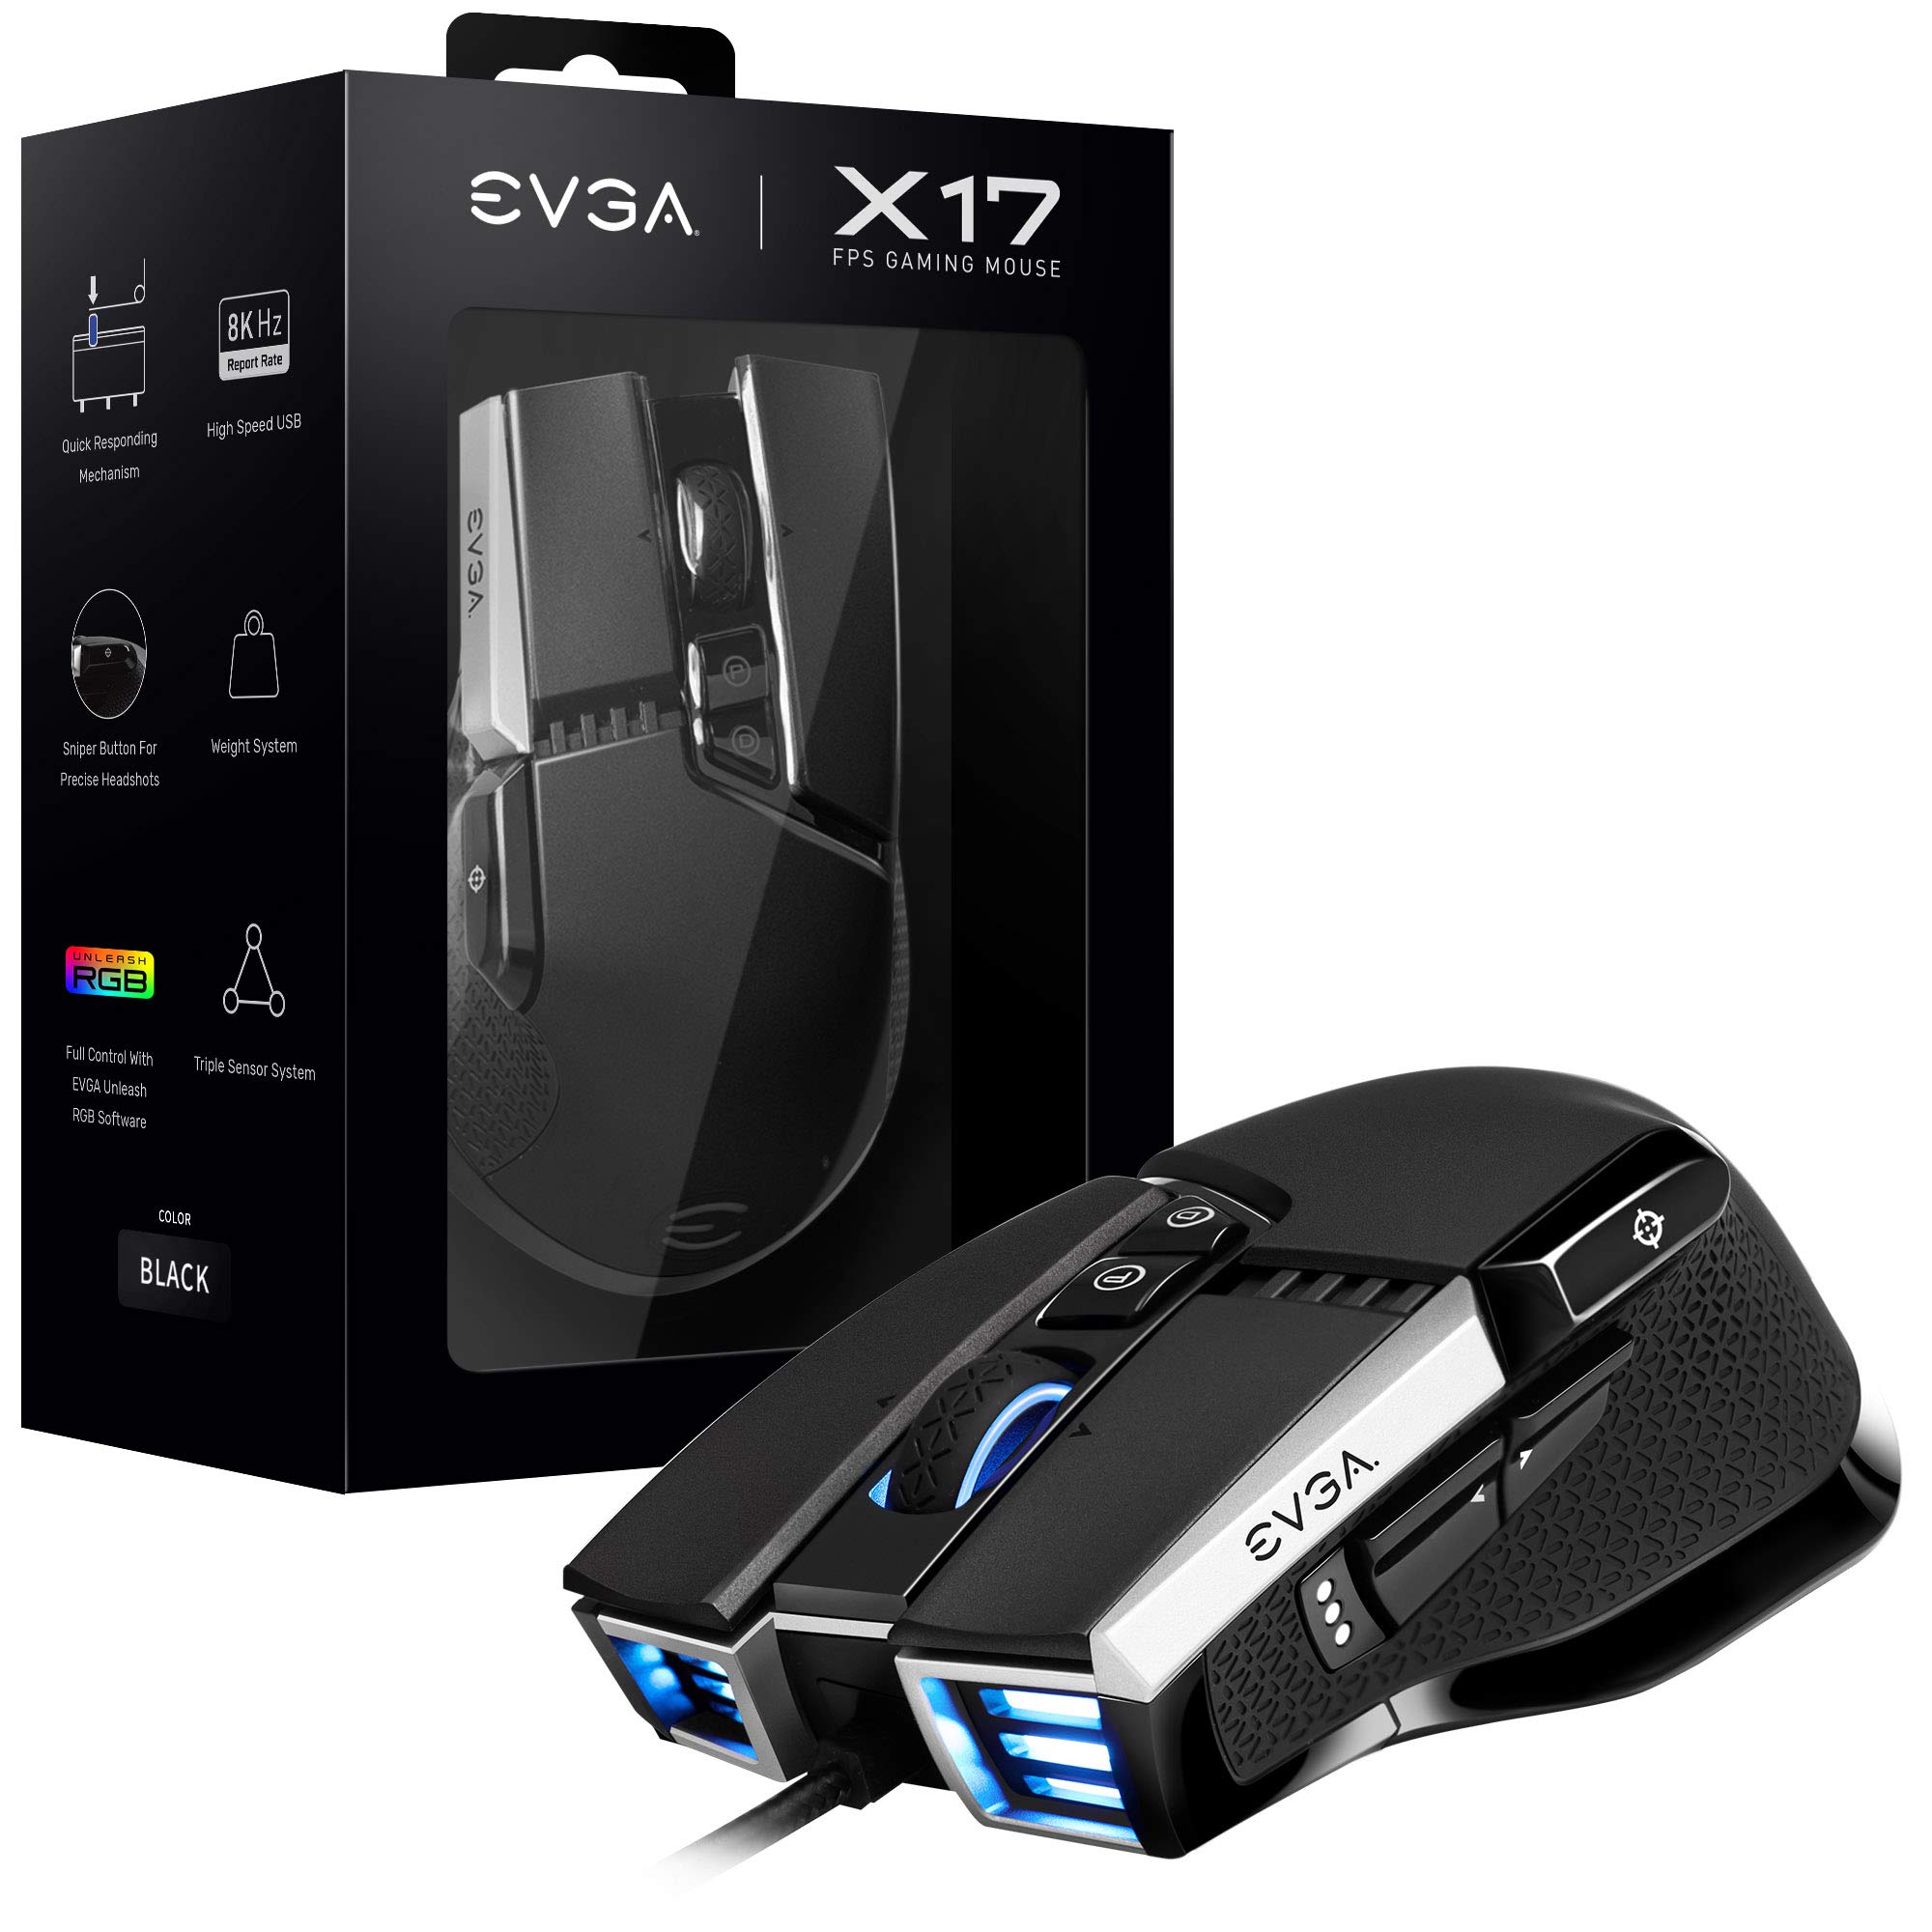 EVGA X17 Wired Optical Gaming Mouse (Black) $13.48 + Free Shipping w/ Prime or on Orders $35+